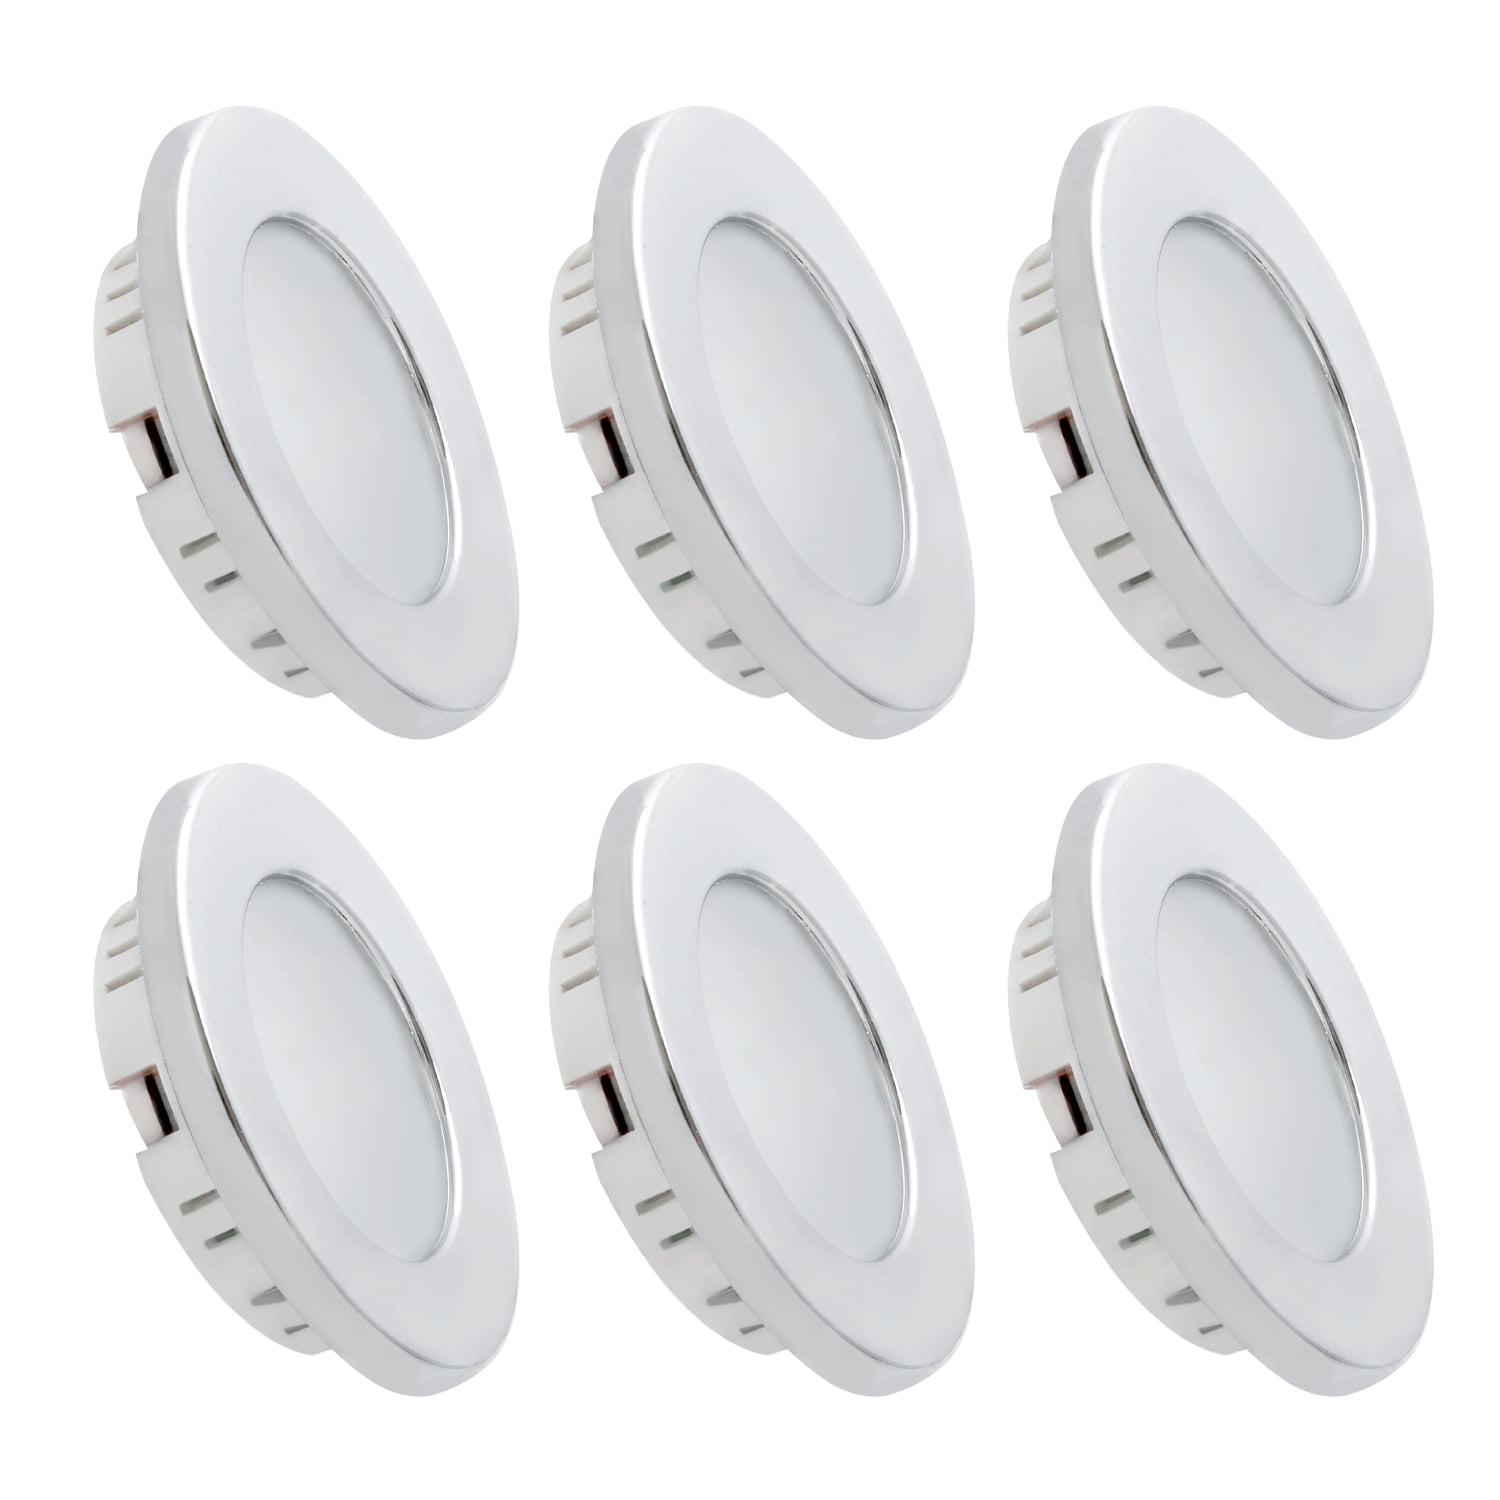 Dream Lighting LED Recessed Ceiling Light Cool White Silver Pack of 6 